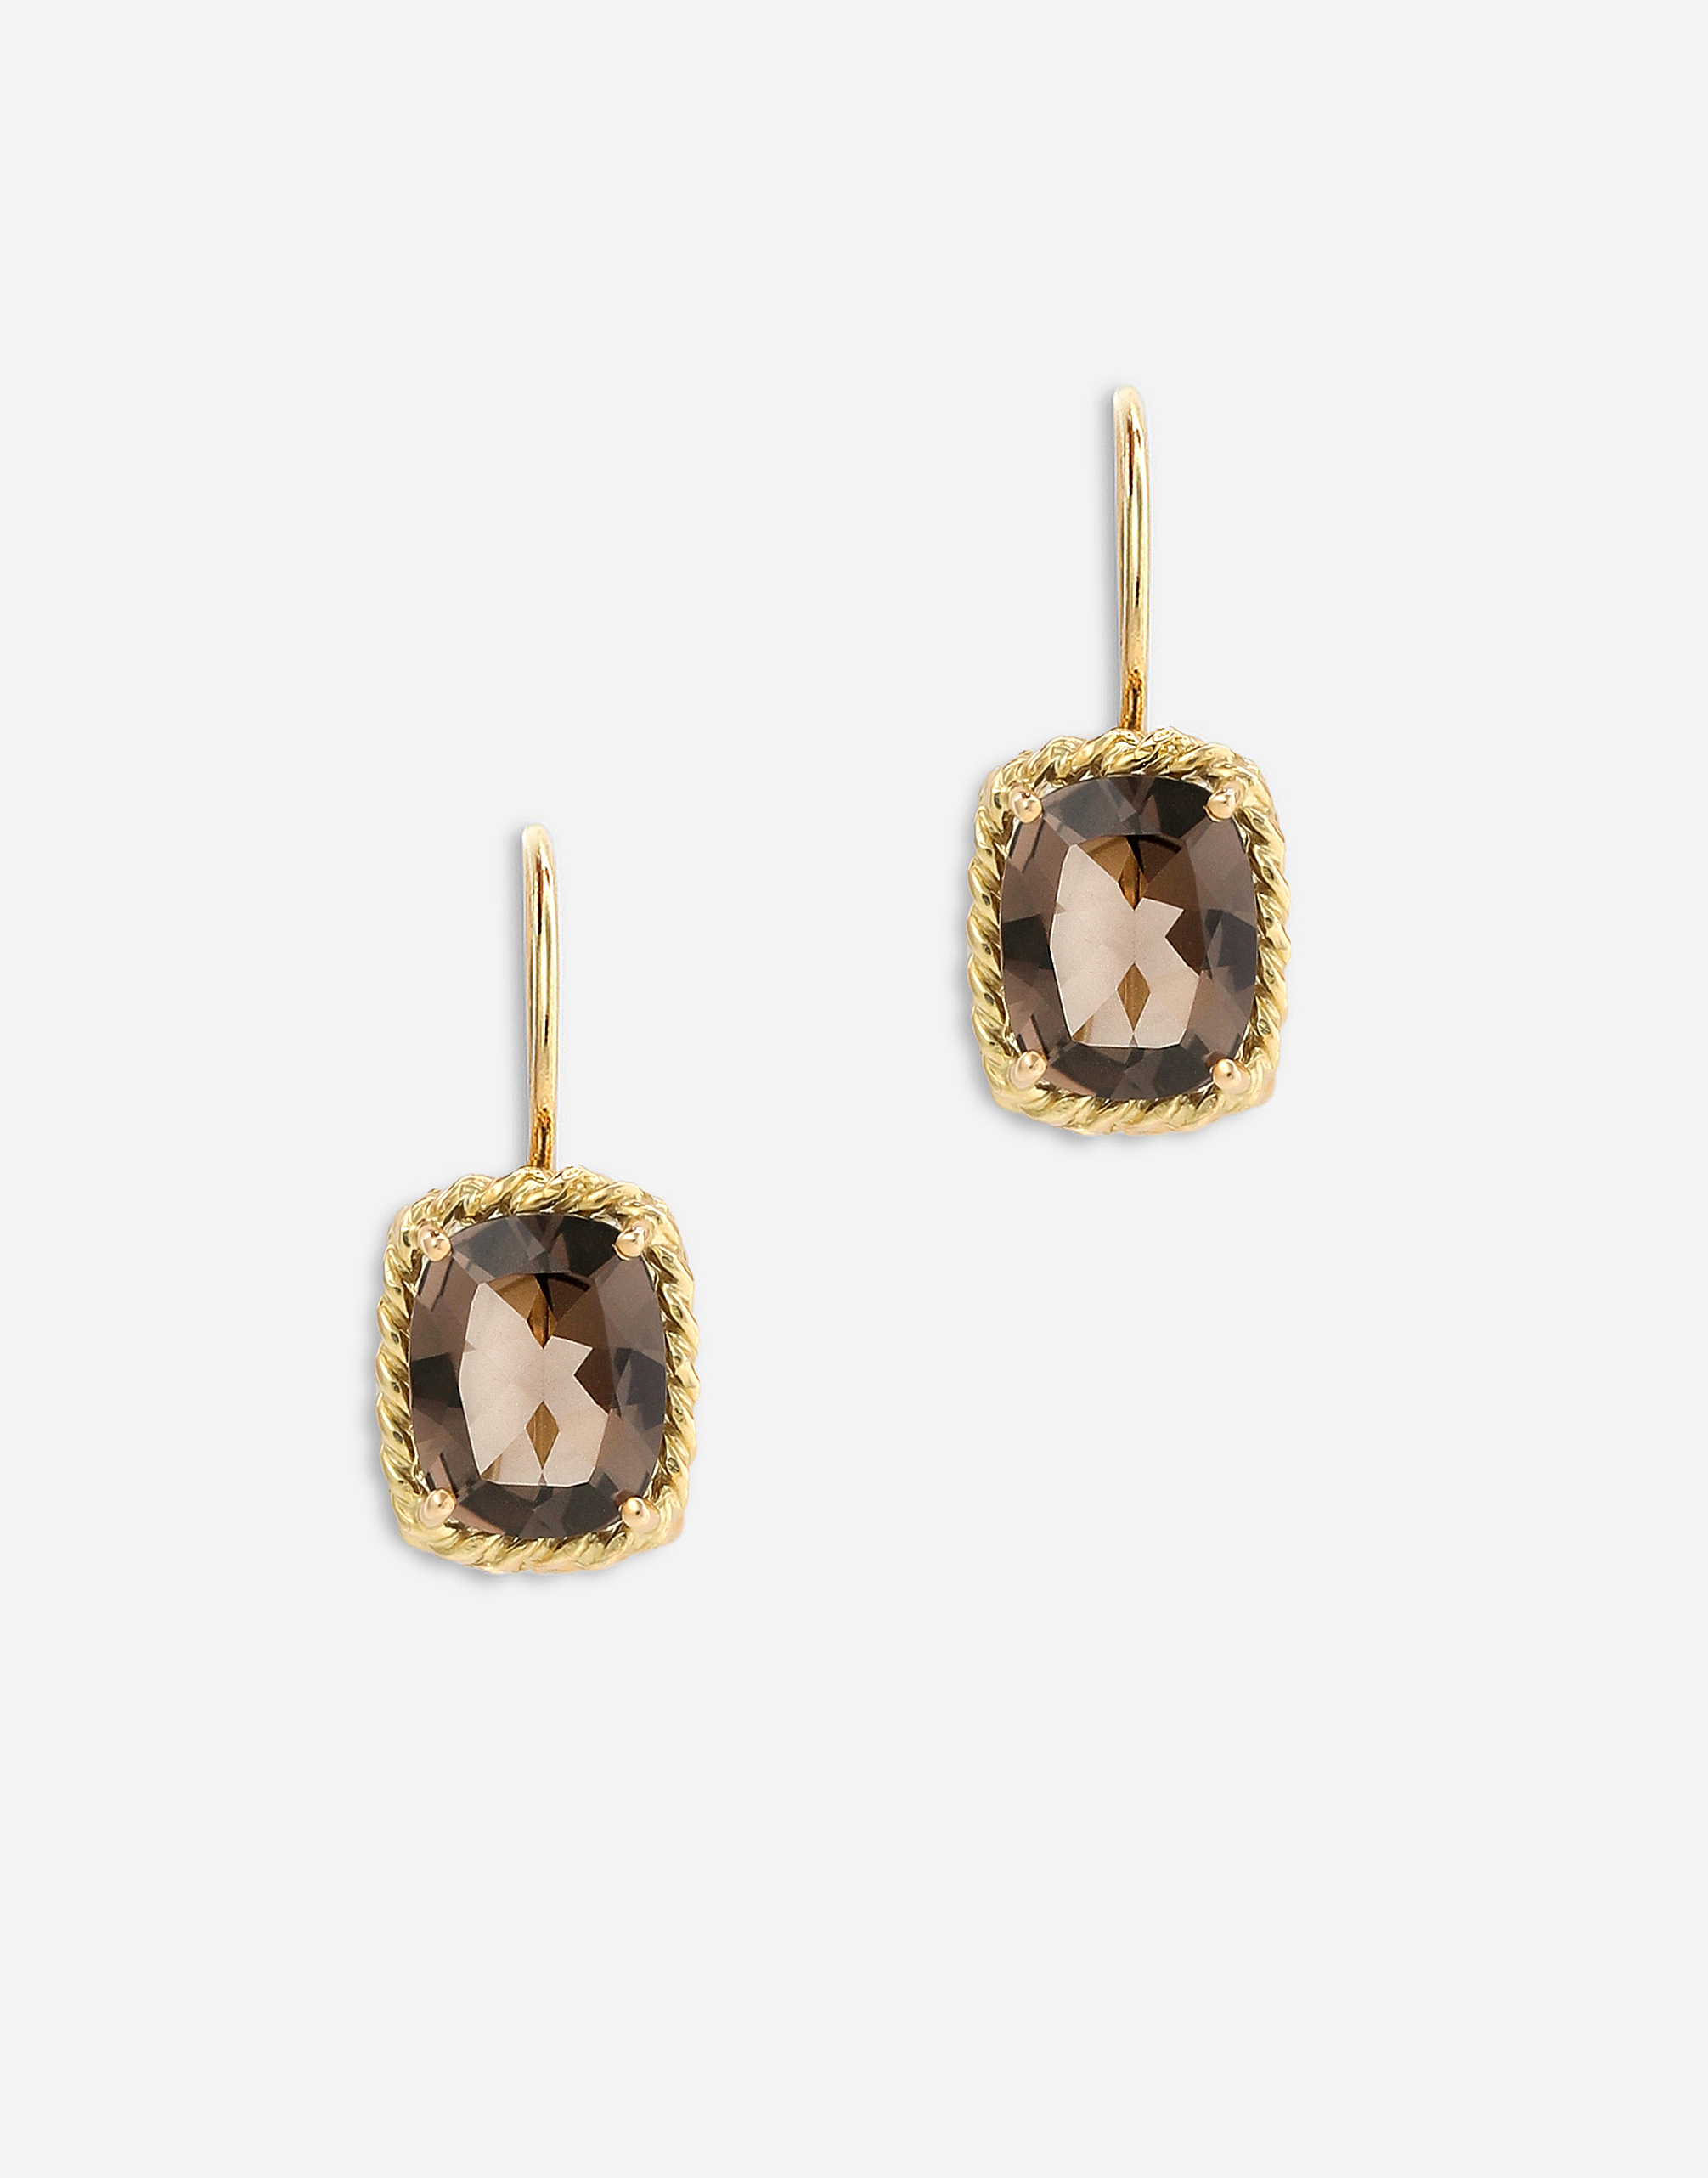 Anna earrings in yellow 18kt gold with smoky quartzes in Gold